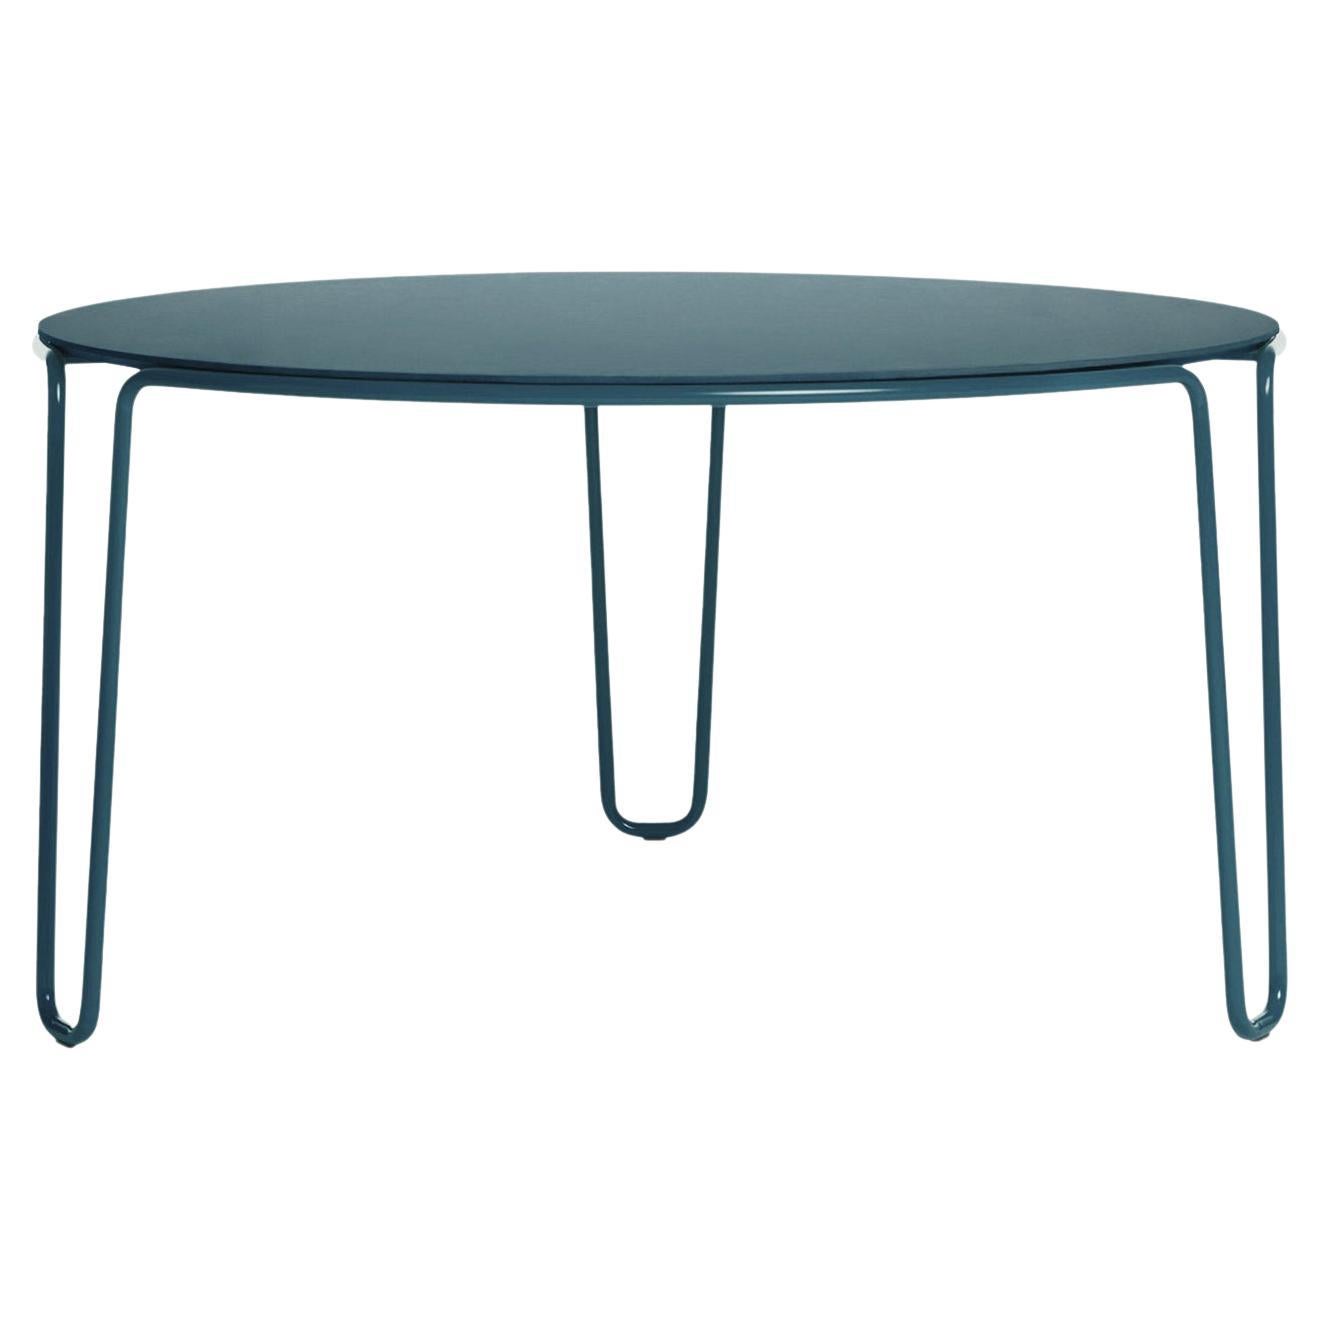 First Turquoise Table by Baldessari & Baldessari For Sale